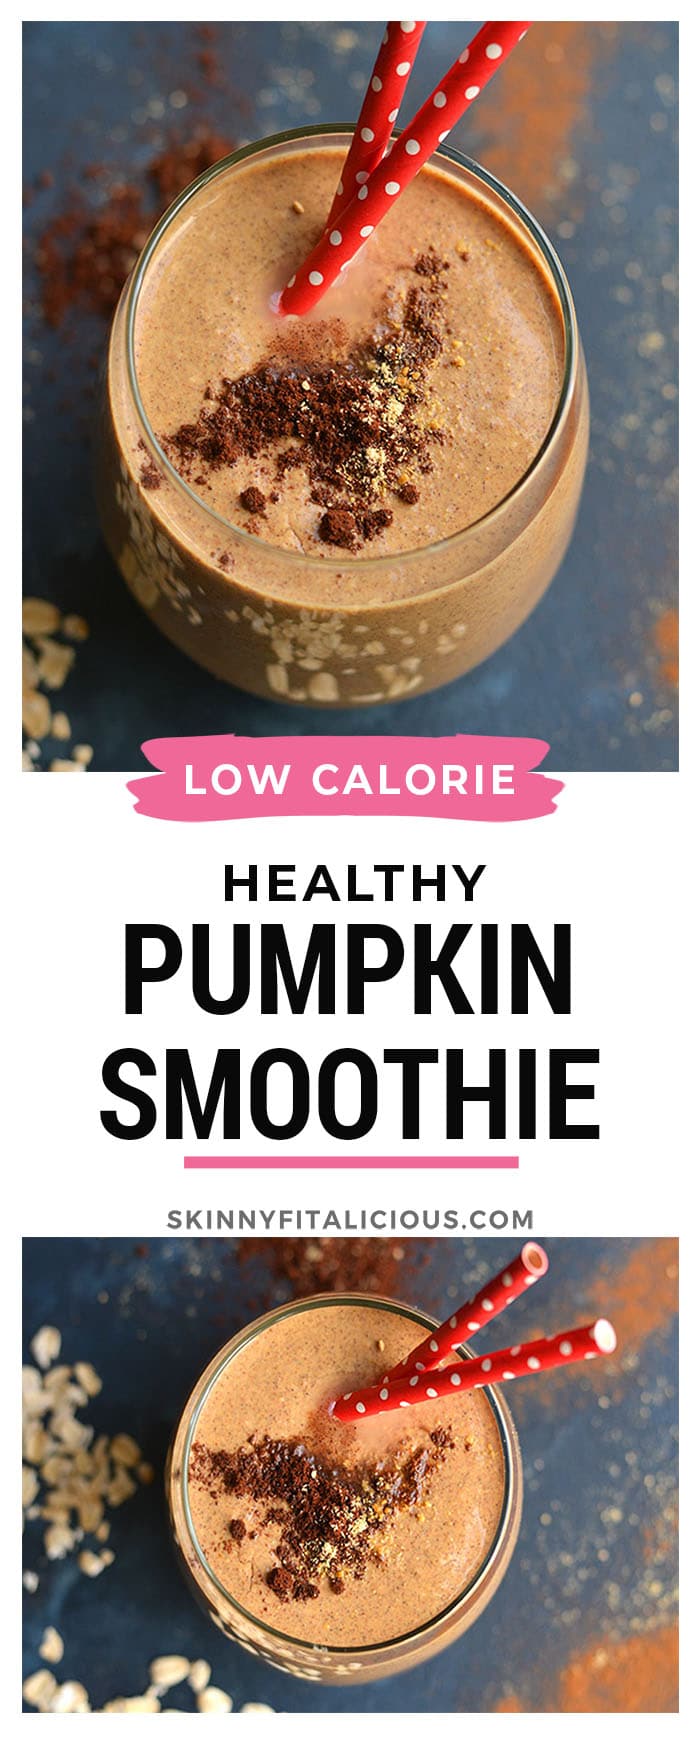 Pumpkin Gingerbread Smoothie! An overnight smoothie filled with antioxidants, probiotics and protein. An energizing way to start the day! Blend the night before and eat the next morning. 